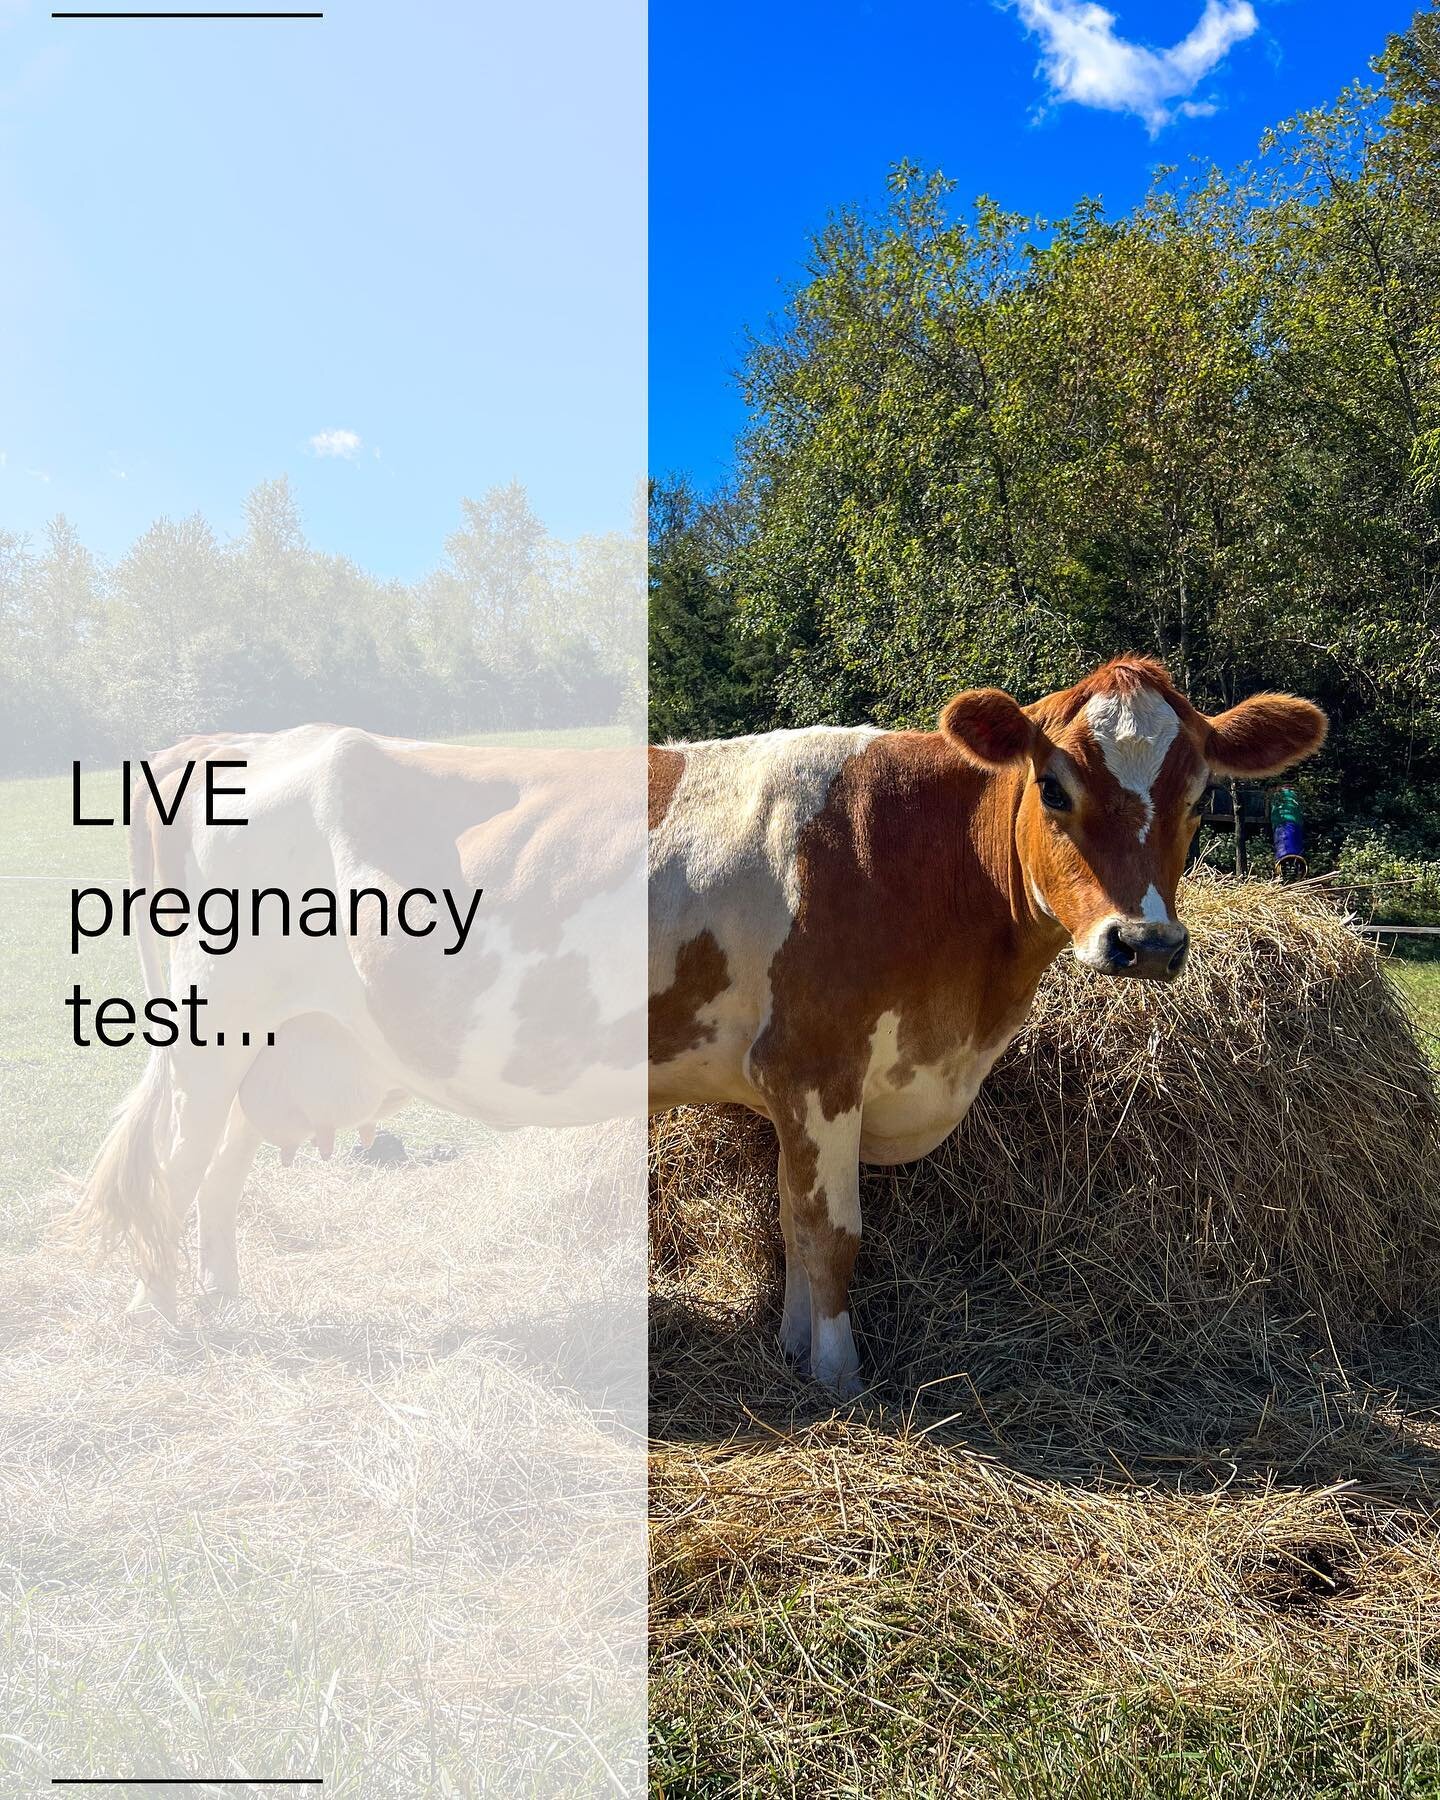 In case you missed it in the vlog&hellip;

Here is our LIVE reaction!

Answering your questions:

Yes you can milk a cow when she is pregnant but you stop a few months before she delivers.

We dried up buttercup before we left on our trip.

We got he